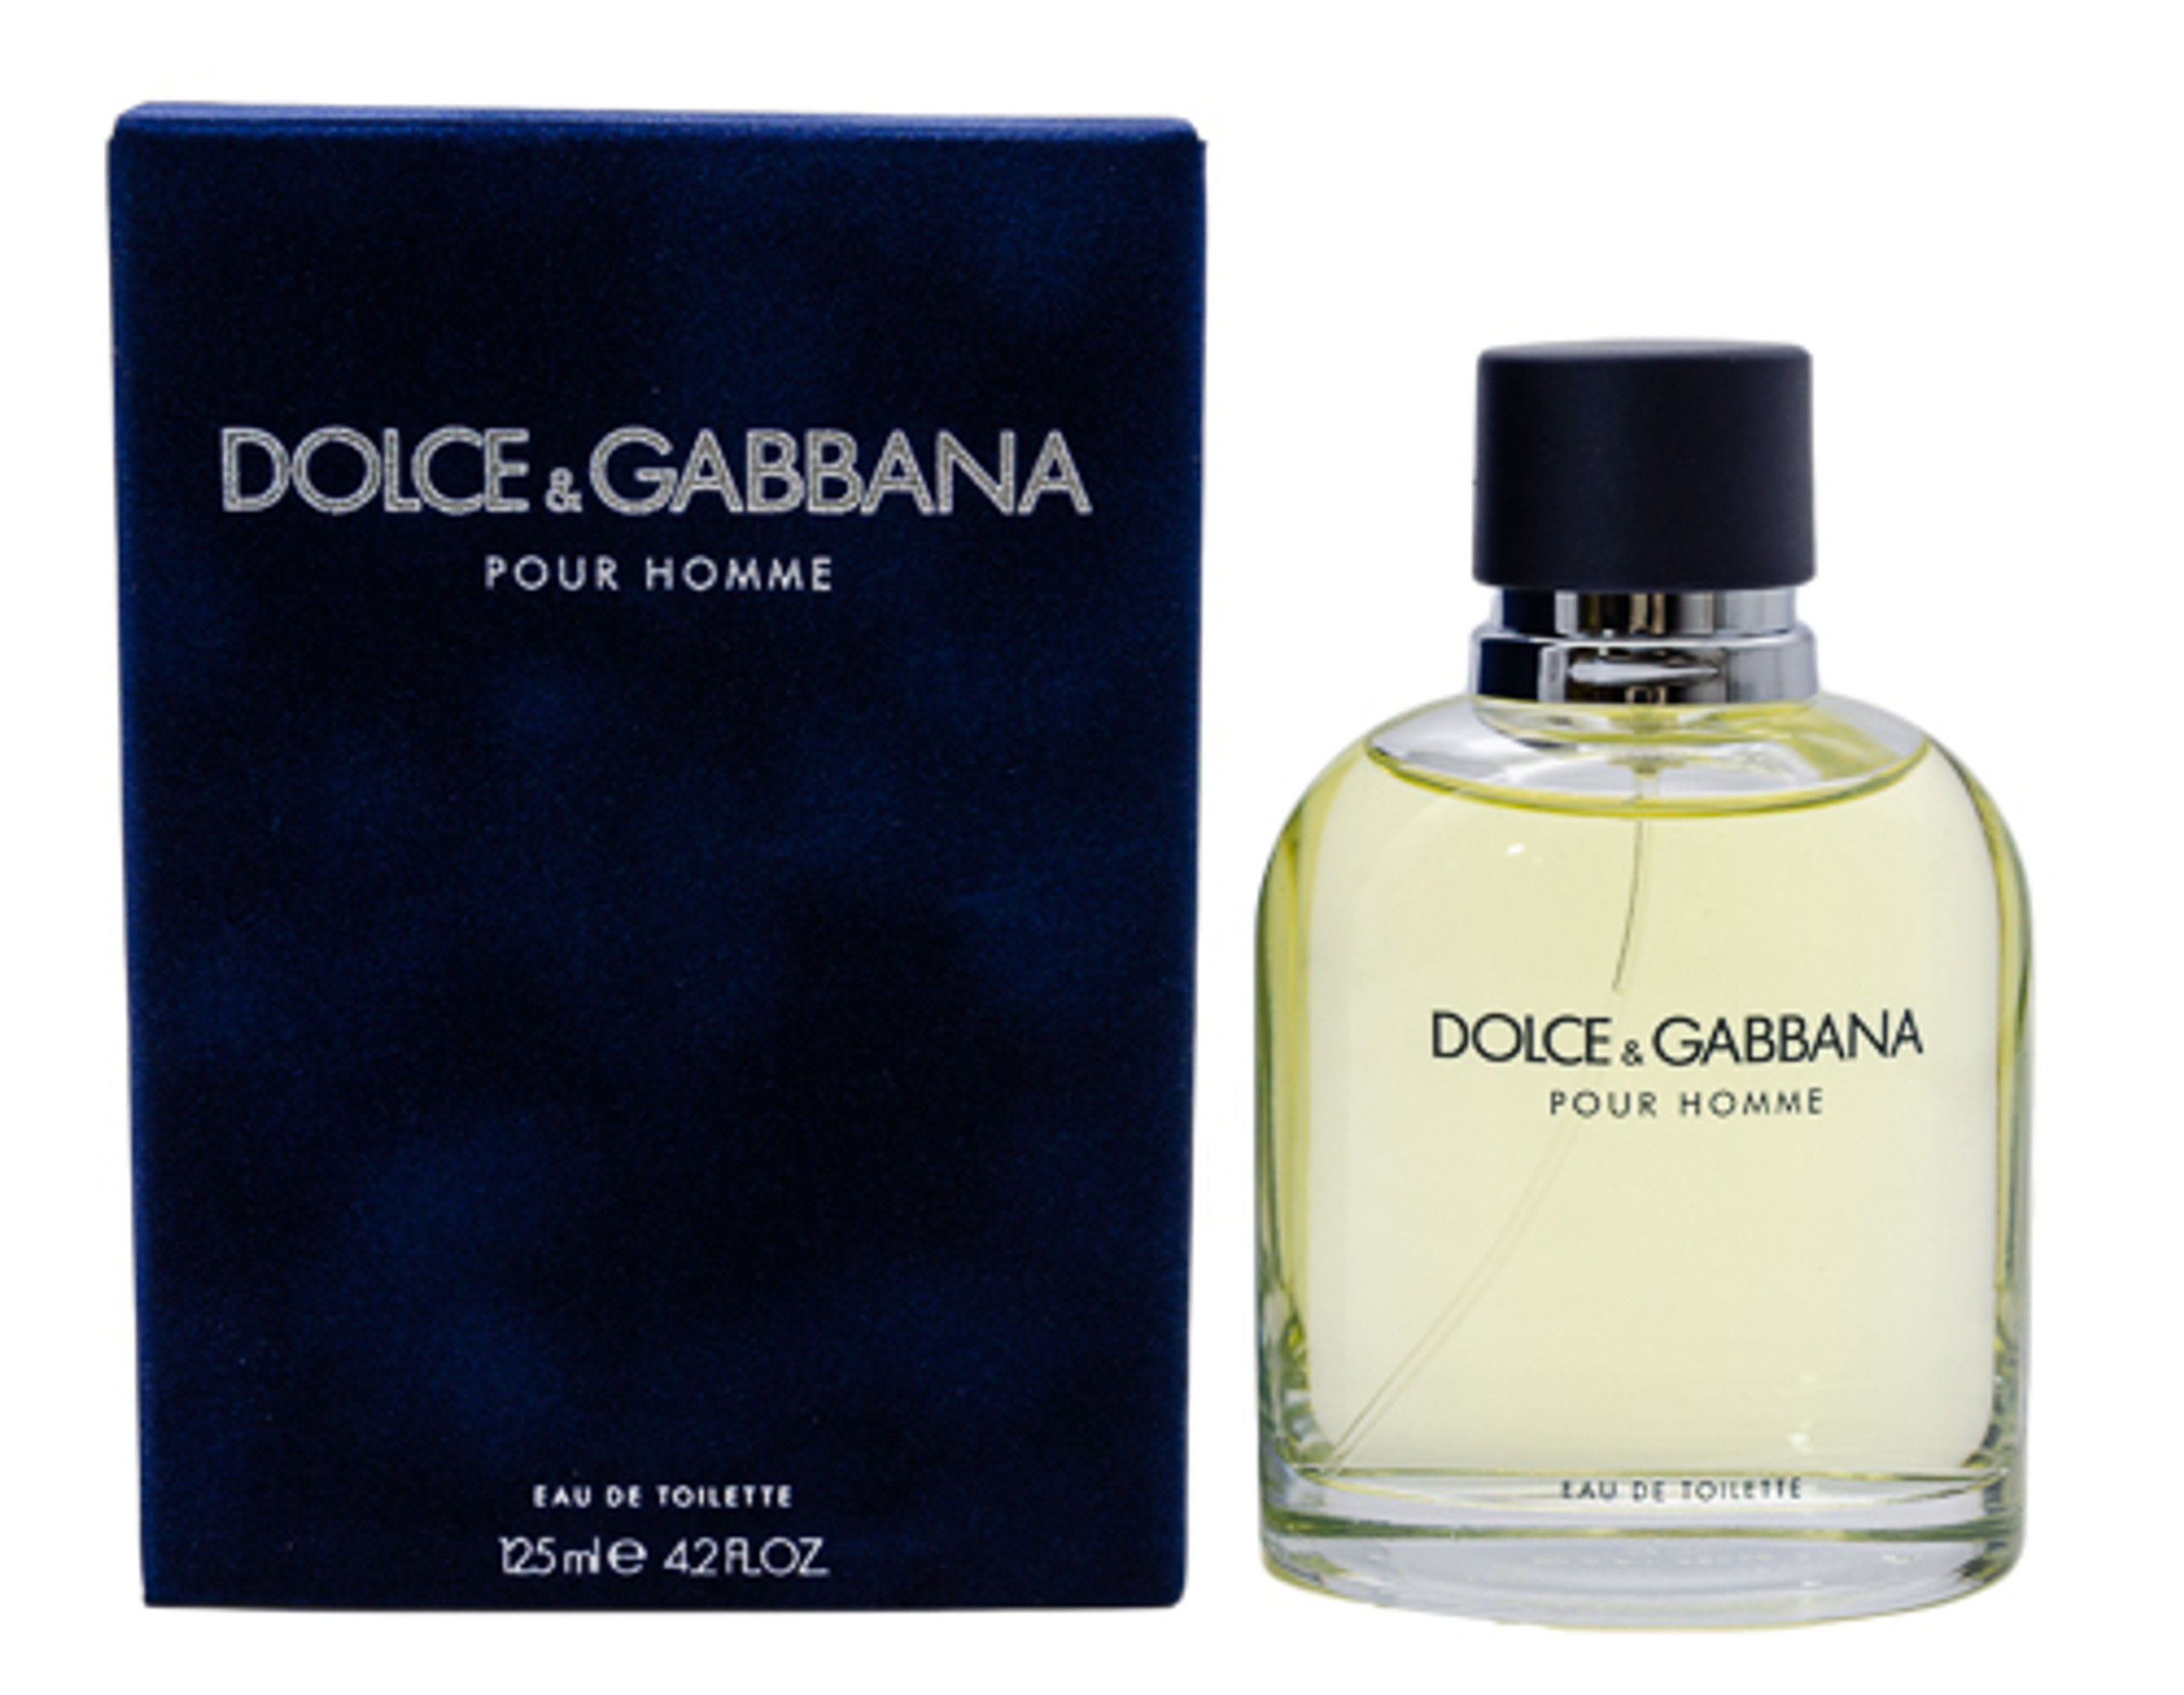 Buy Dolce & Gabbana Pour Homme by Dolce & Gabbana 4.2 oz EDT for Men ...